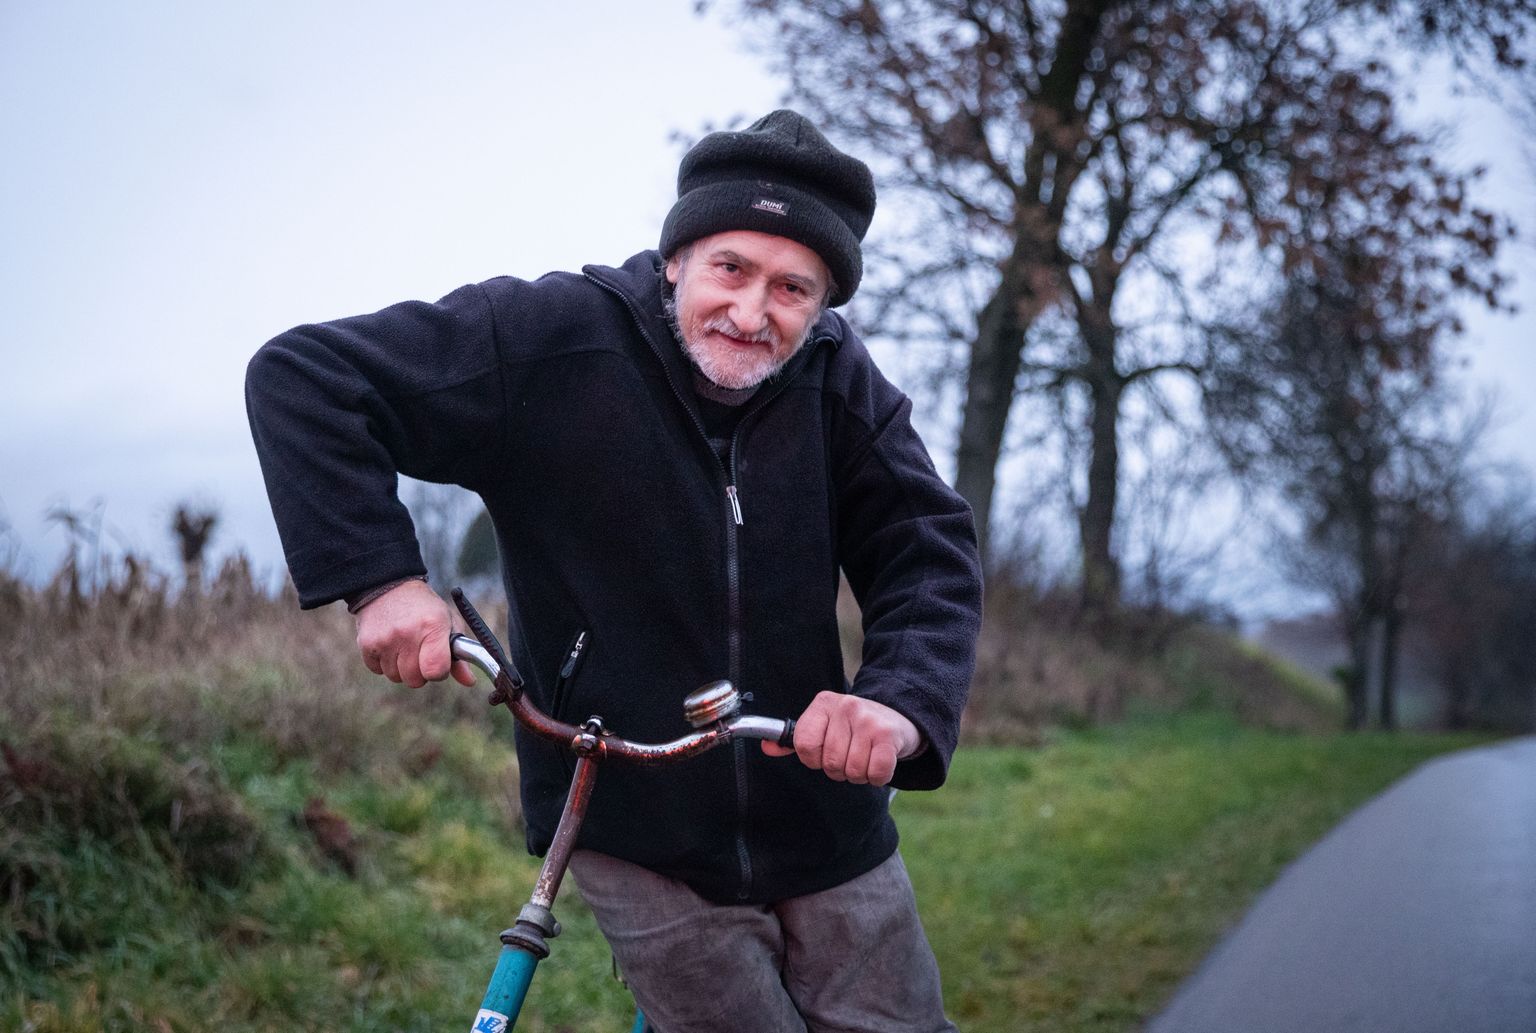 Stanisław, a farmer, pushed his bicycle next to his hand after marching home from a neighboring village that had been hit by a rocket and thanked his luck that he was still alive.